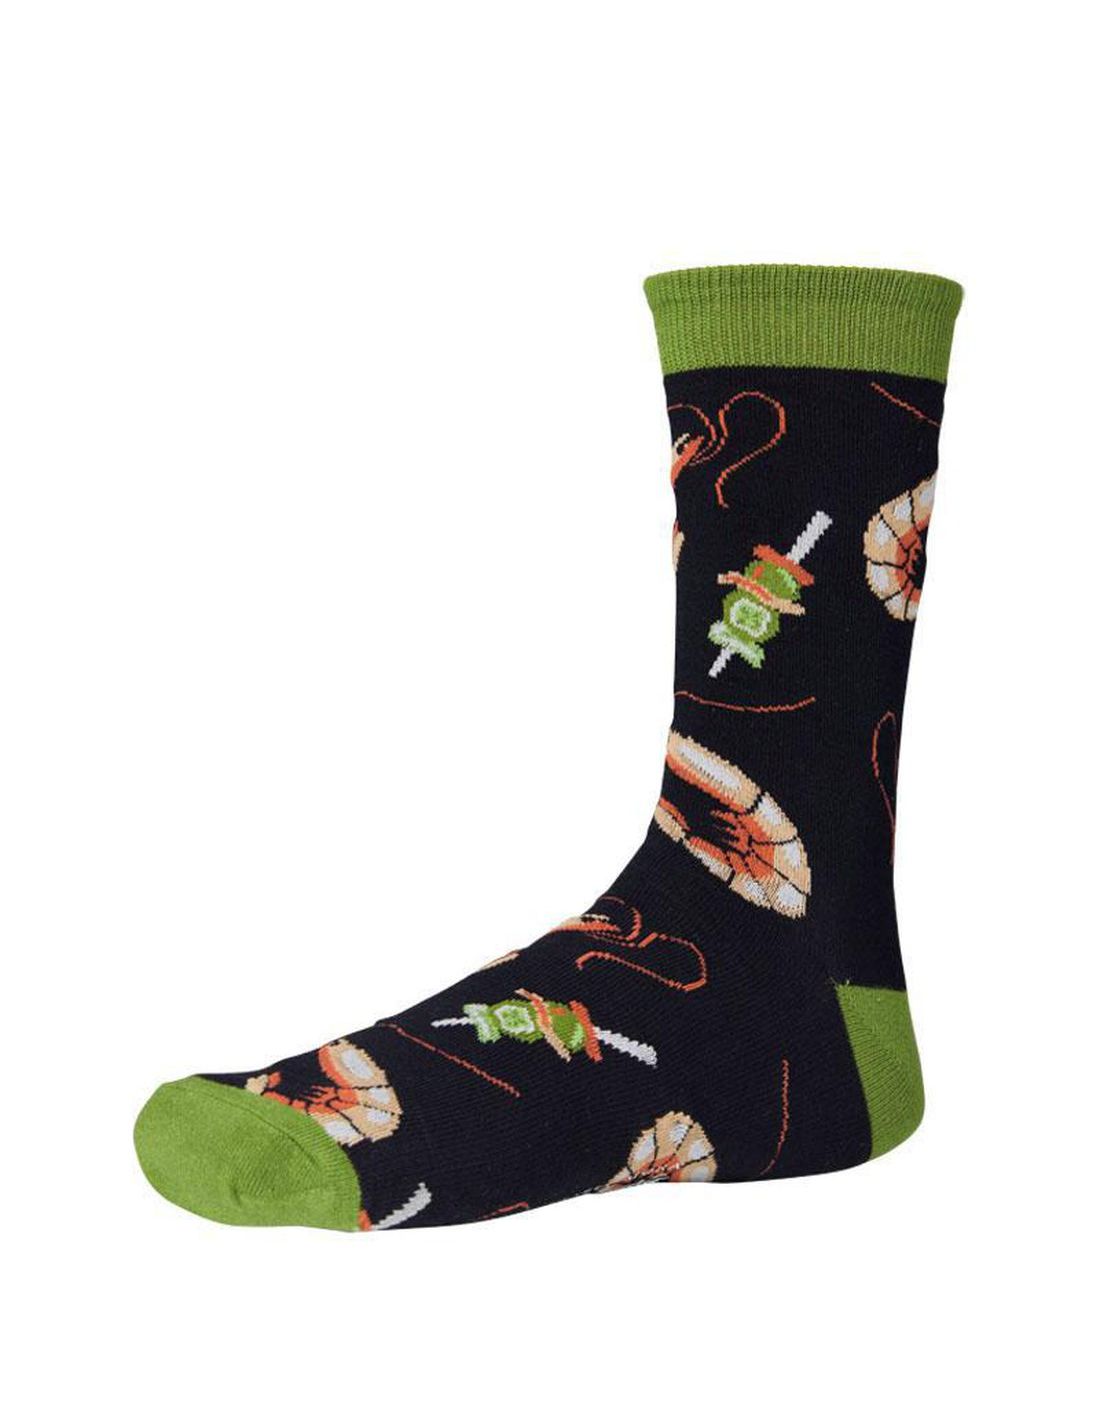 Ysabel Mora Shrimp Sock - Dark navy cotton ankle socks with an all over bbq shrimp and skewers pattern and olive green cuff, toe and heel.